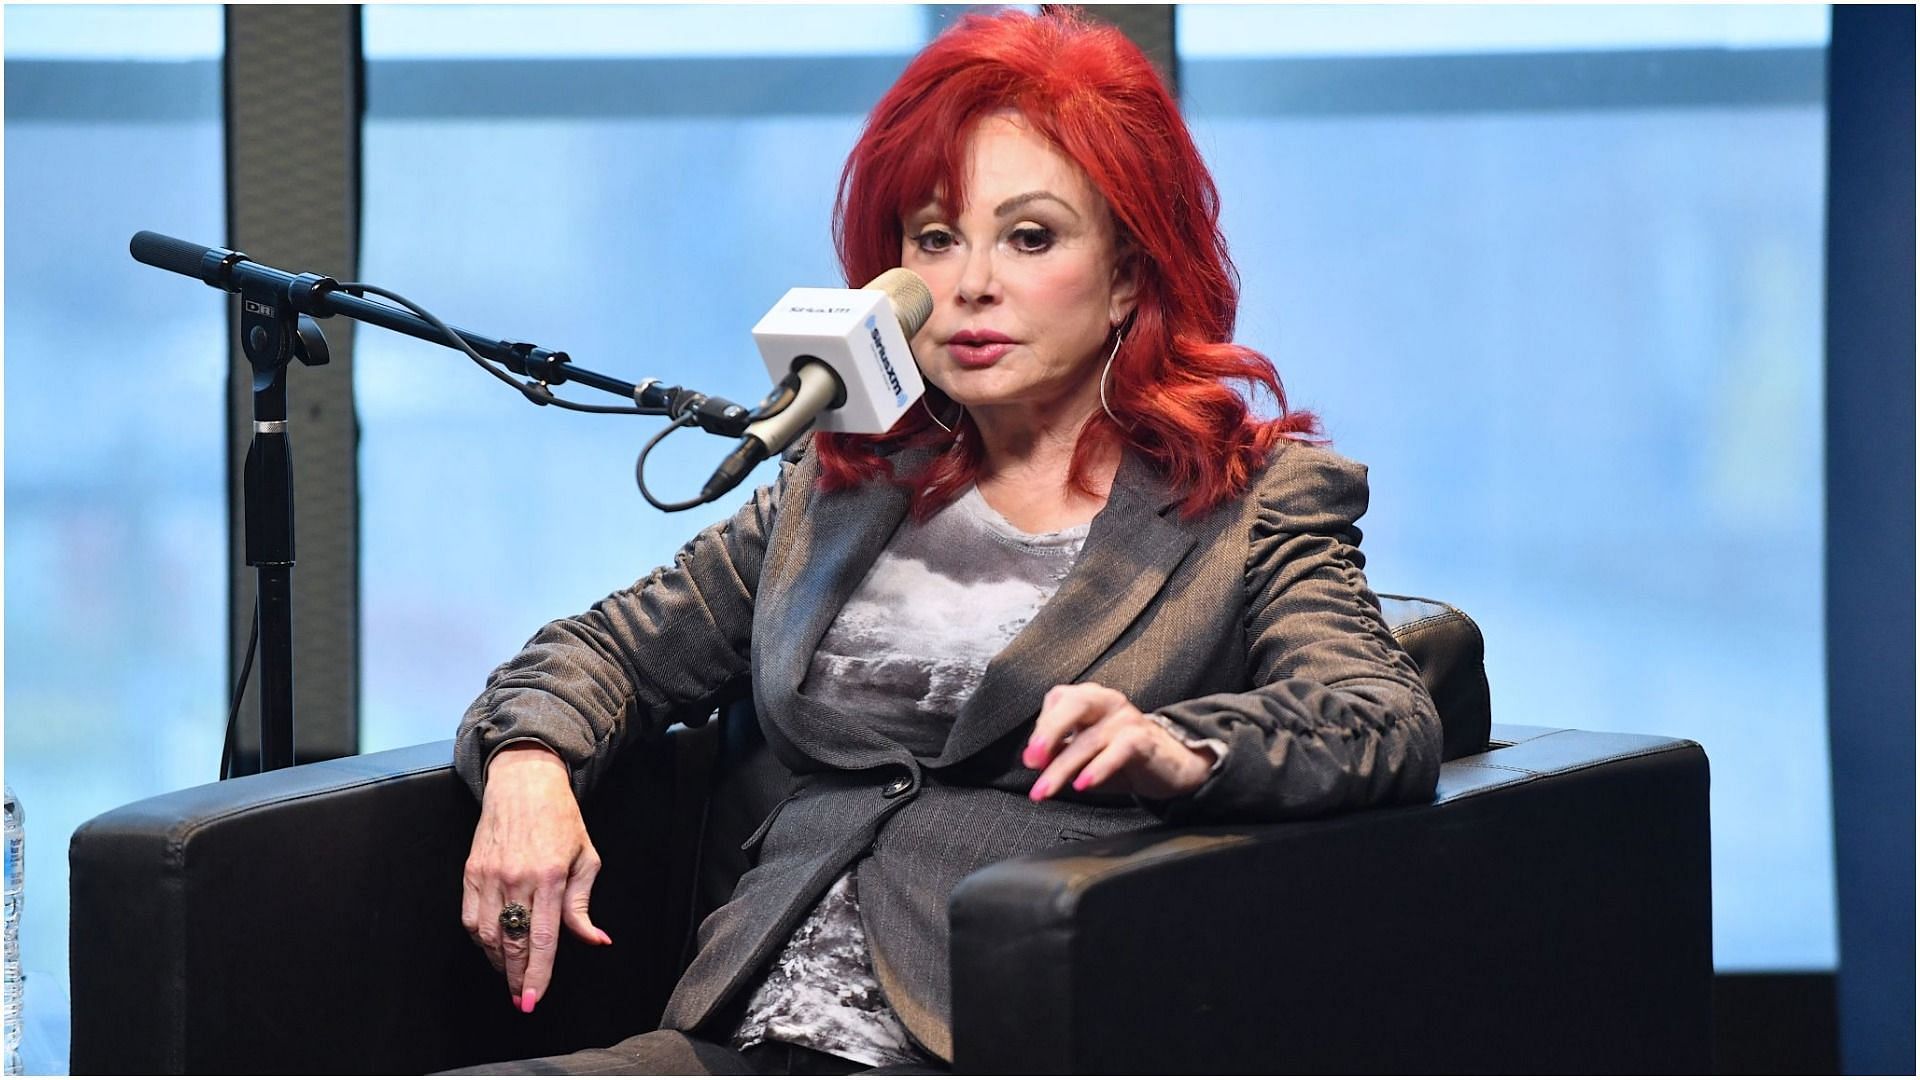 Naomi Judd spoke about her mental issues in an interview in 2016 (Image via Jason Davis/Getty Images)